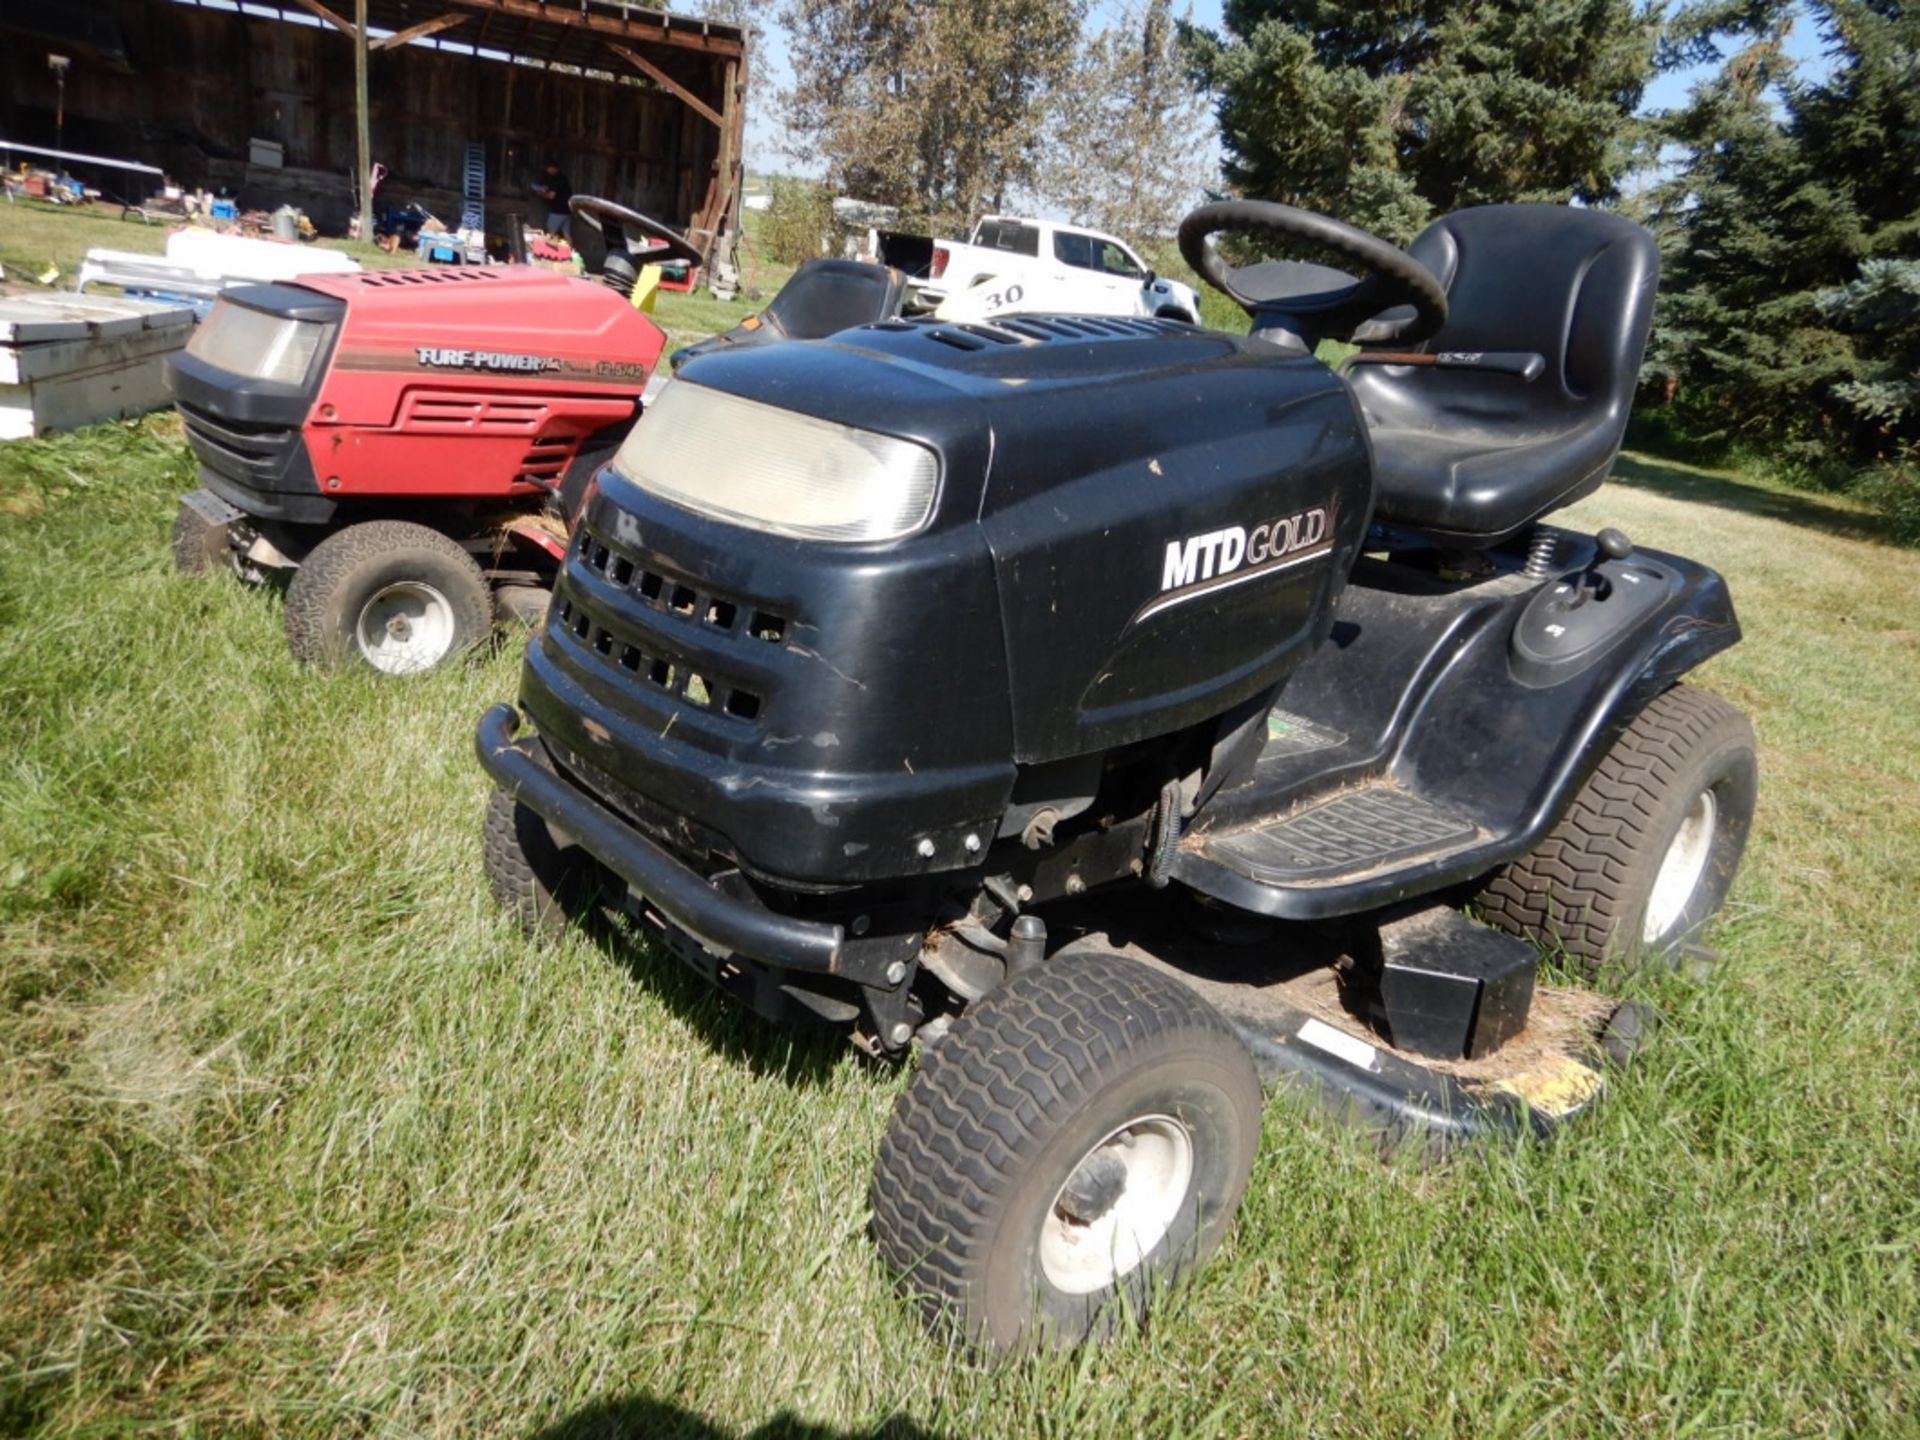 MTD GOLD RIDE-ON LAWN MOWER, 19HP, 46" DECK - Image 2 of 5